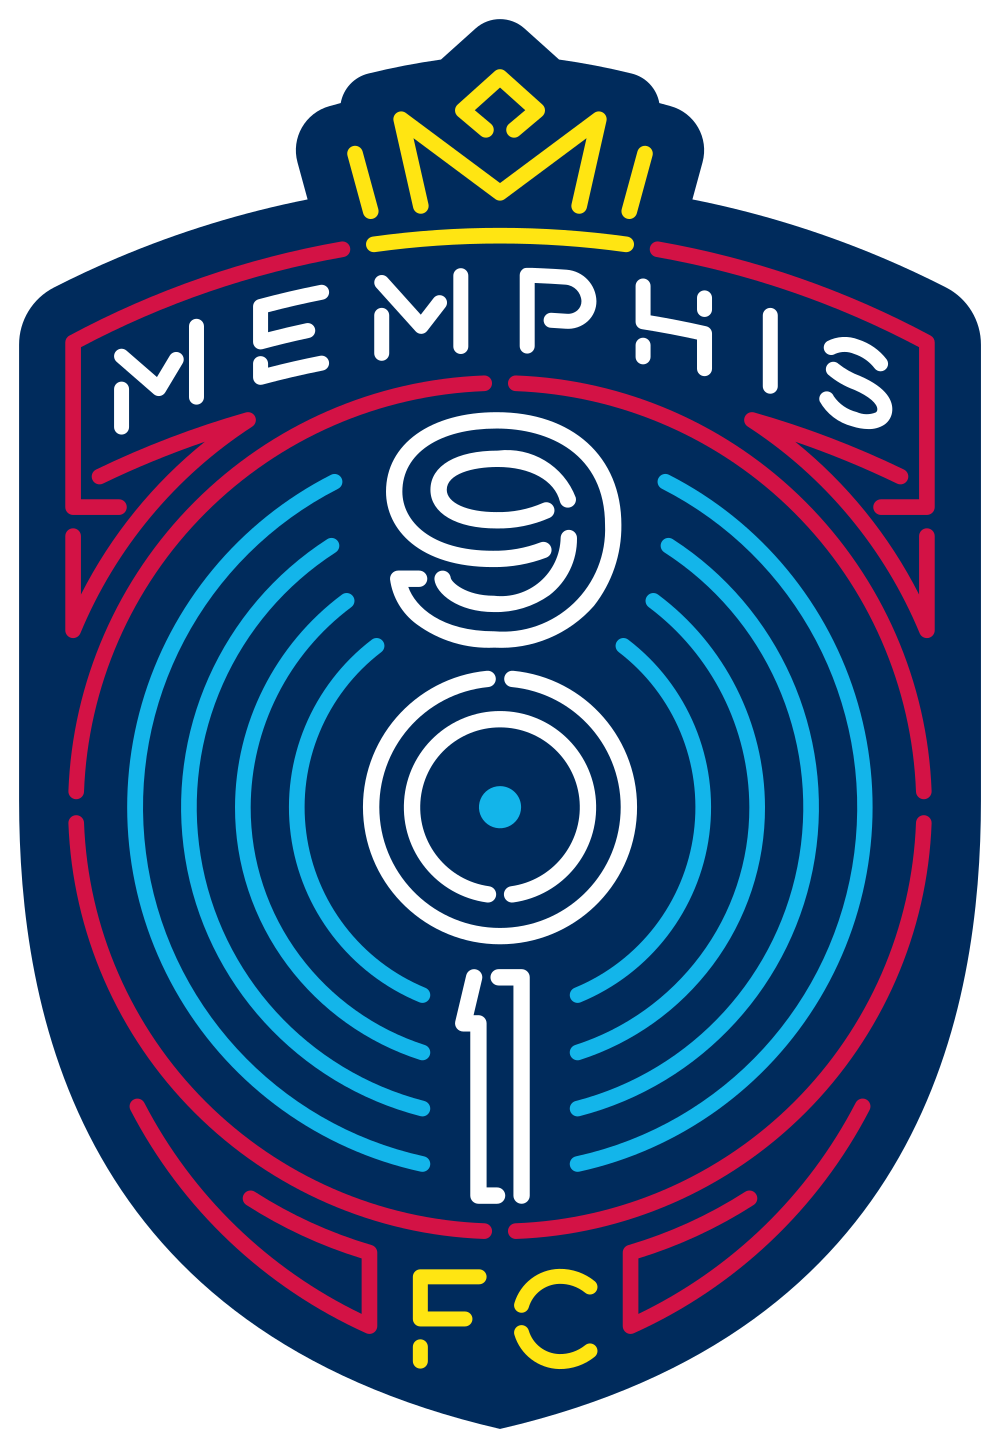 Goodrum Sets Club Record for Goals as Memphis 901 FC Clinches No. 2 Seed with 2-0 Victory Over FC Tulsa